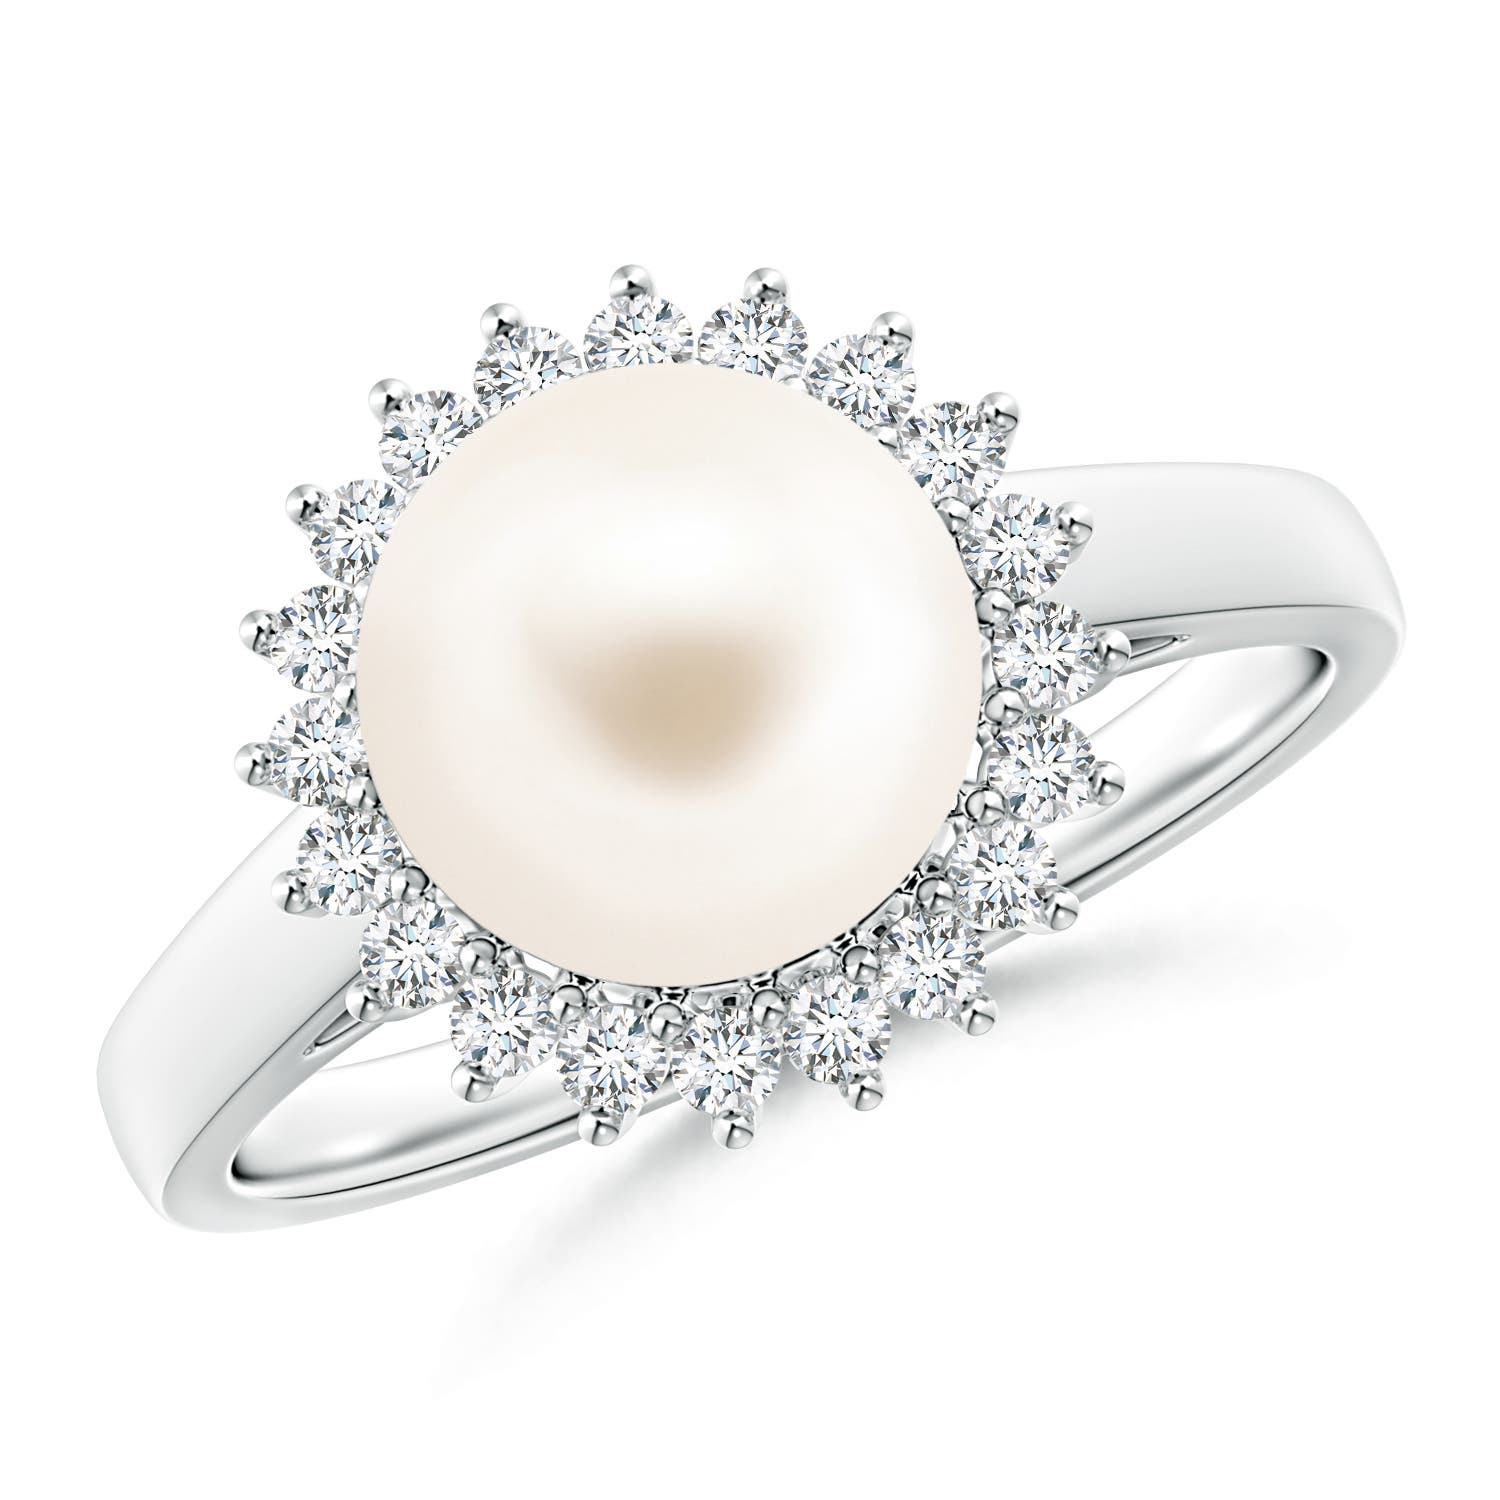 Freshwater Pearl Ring with Floral Halo | Angara